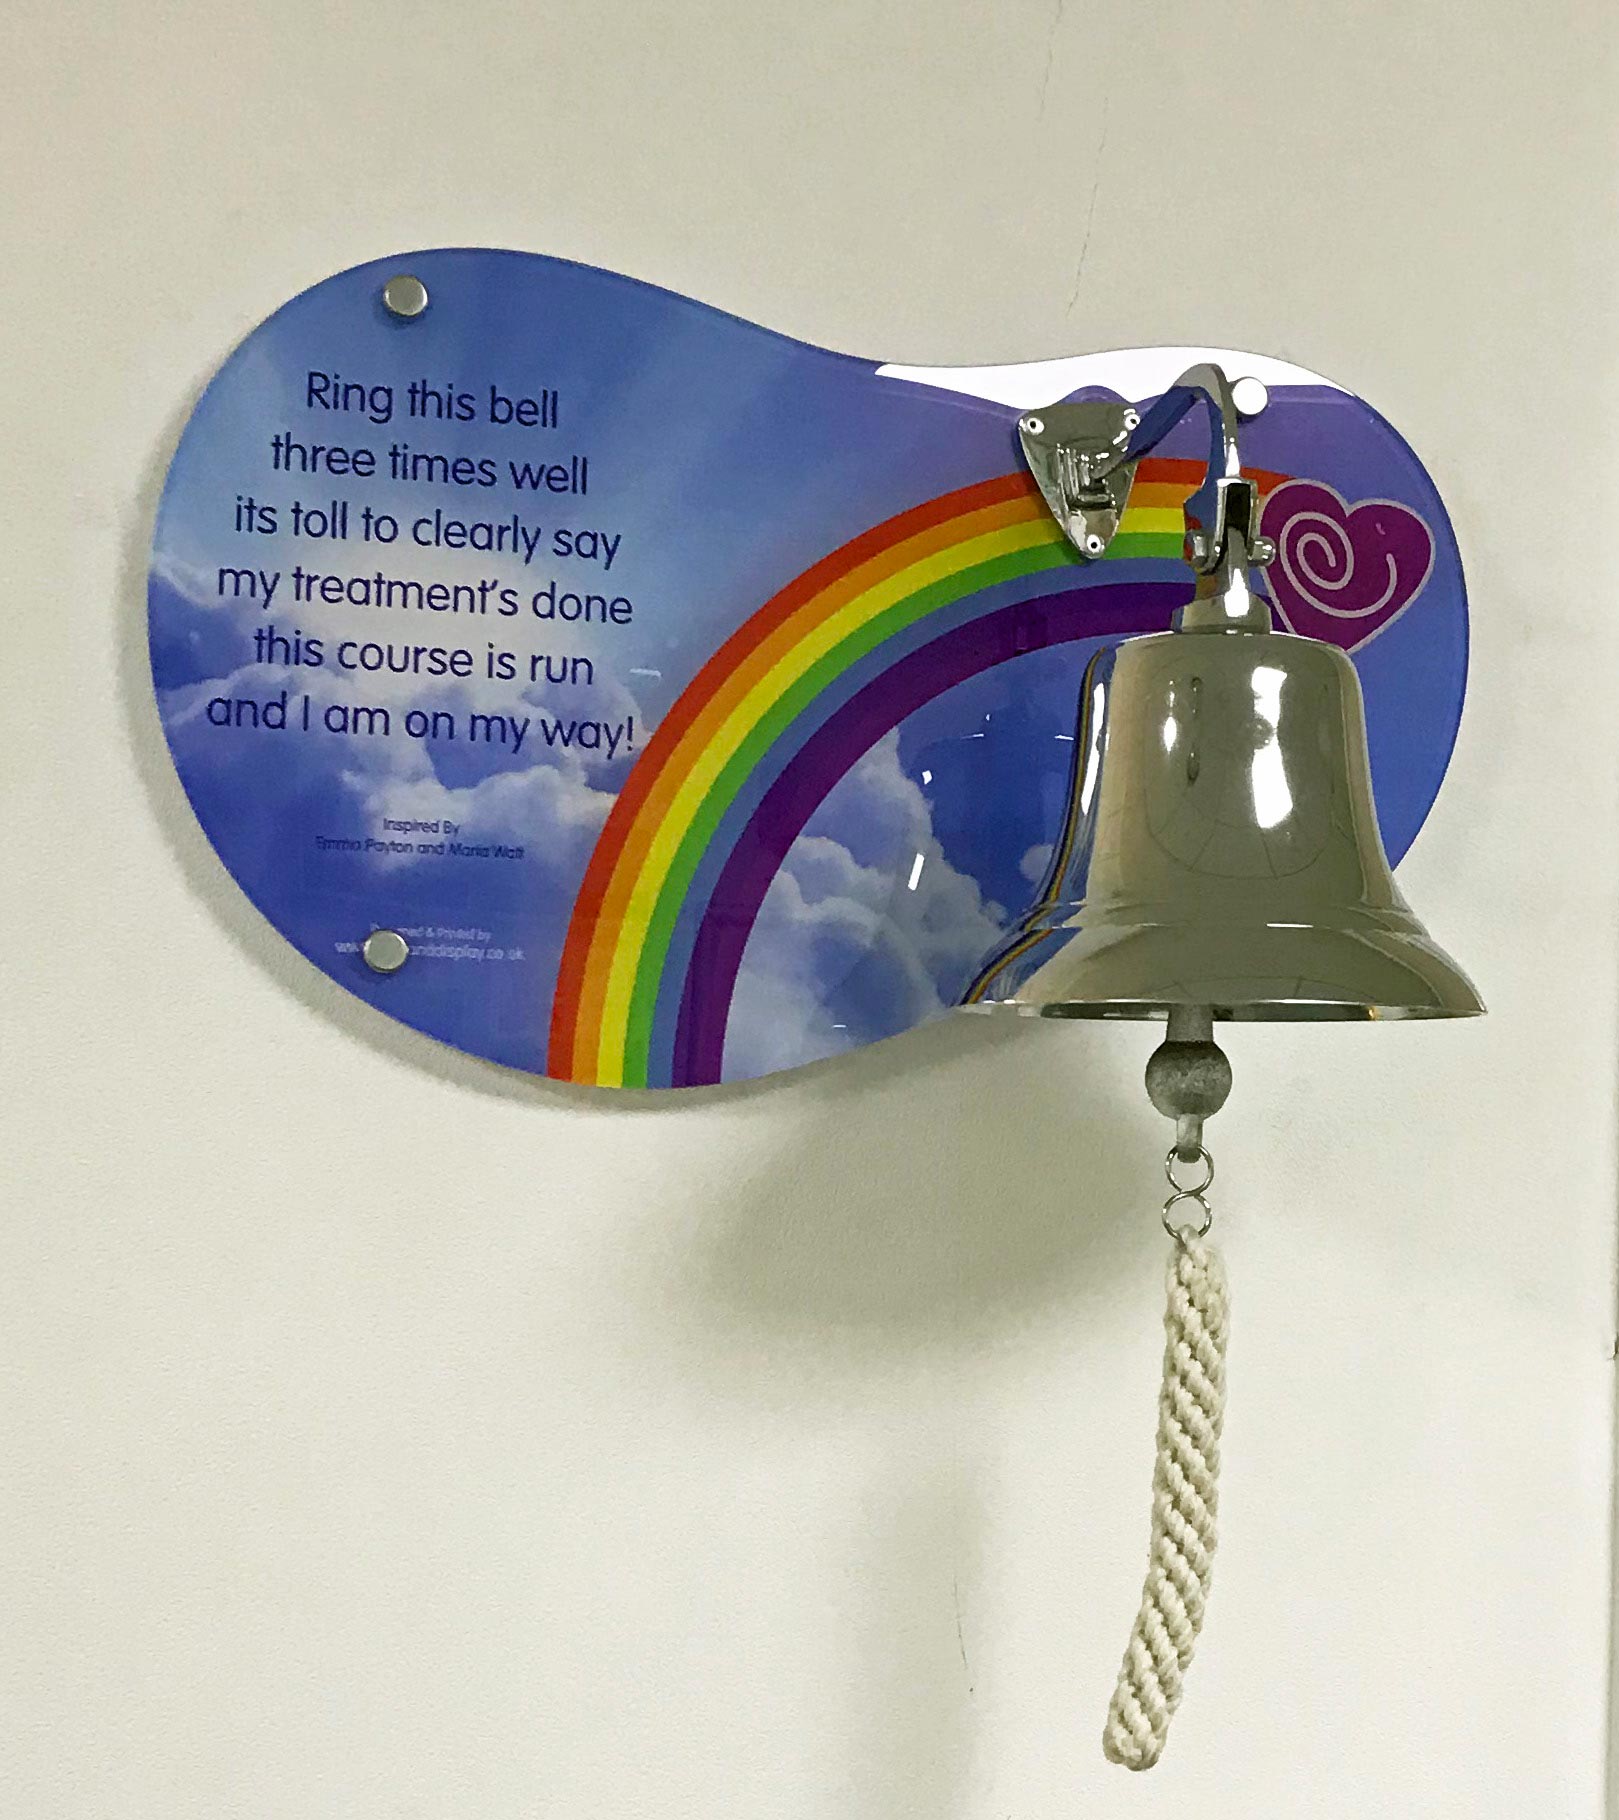 Spire Hartswood Hospital introduces End of Treatment Bell for cancer patients